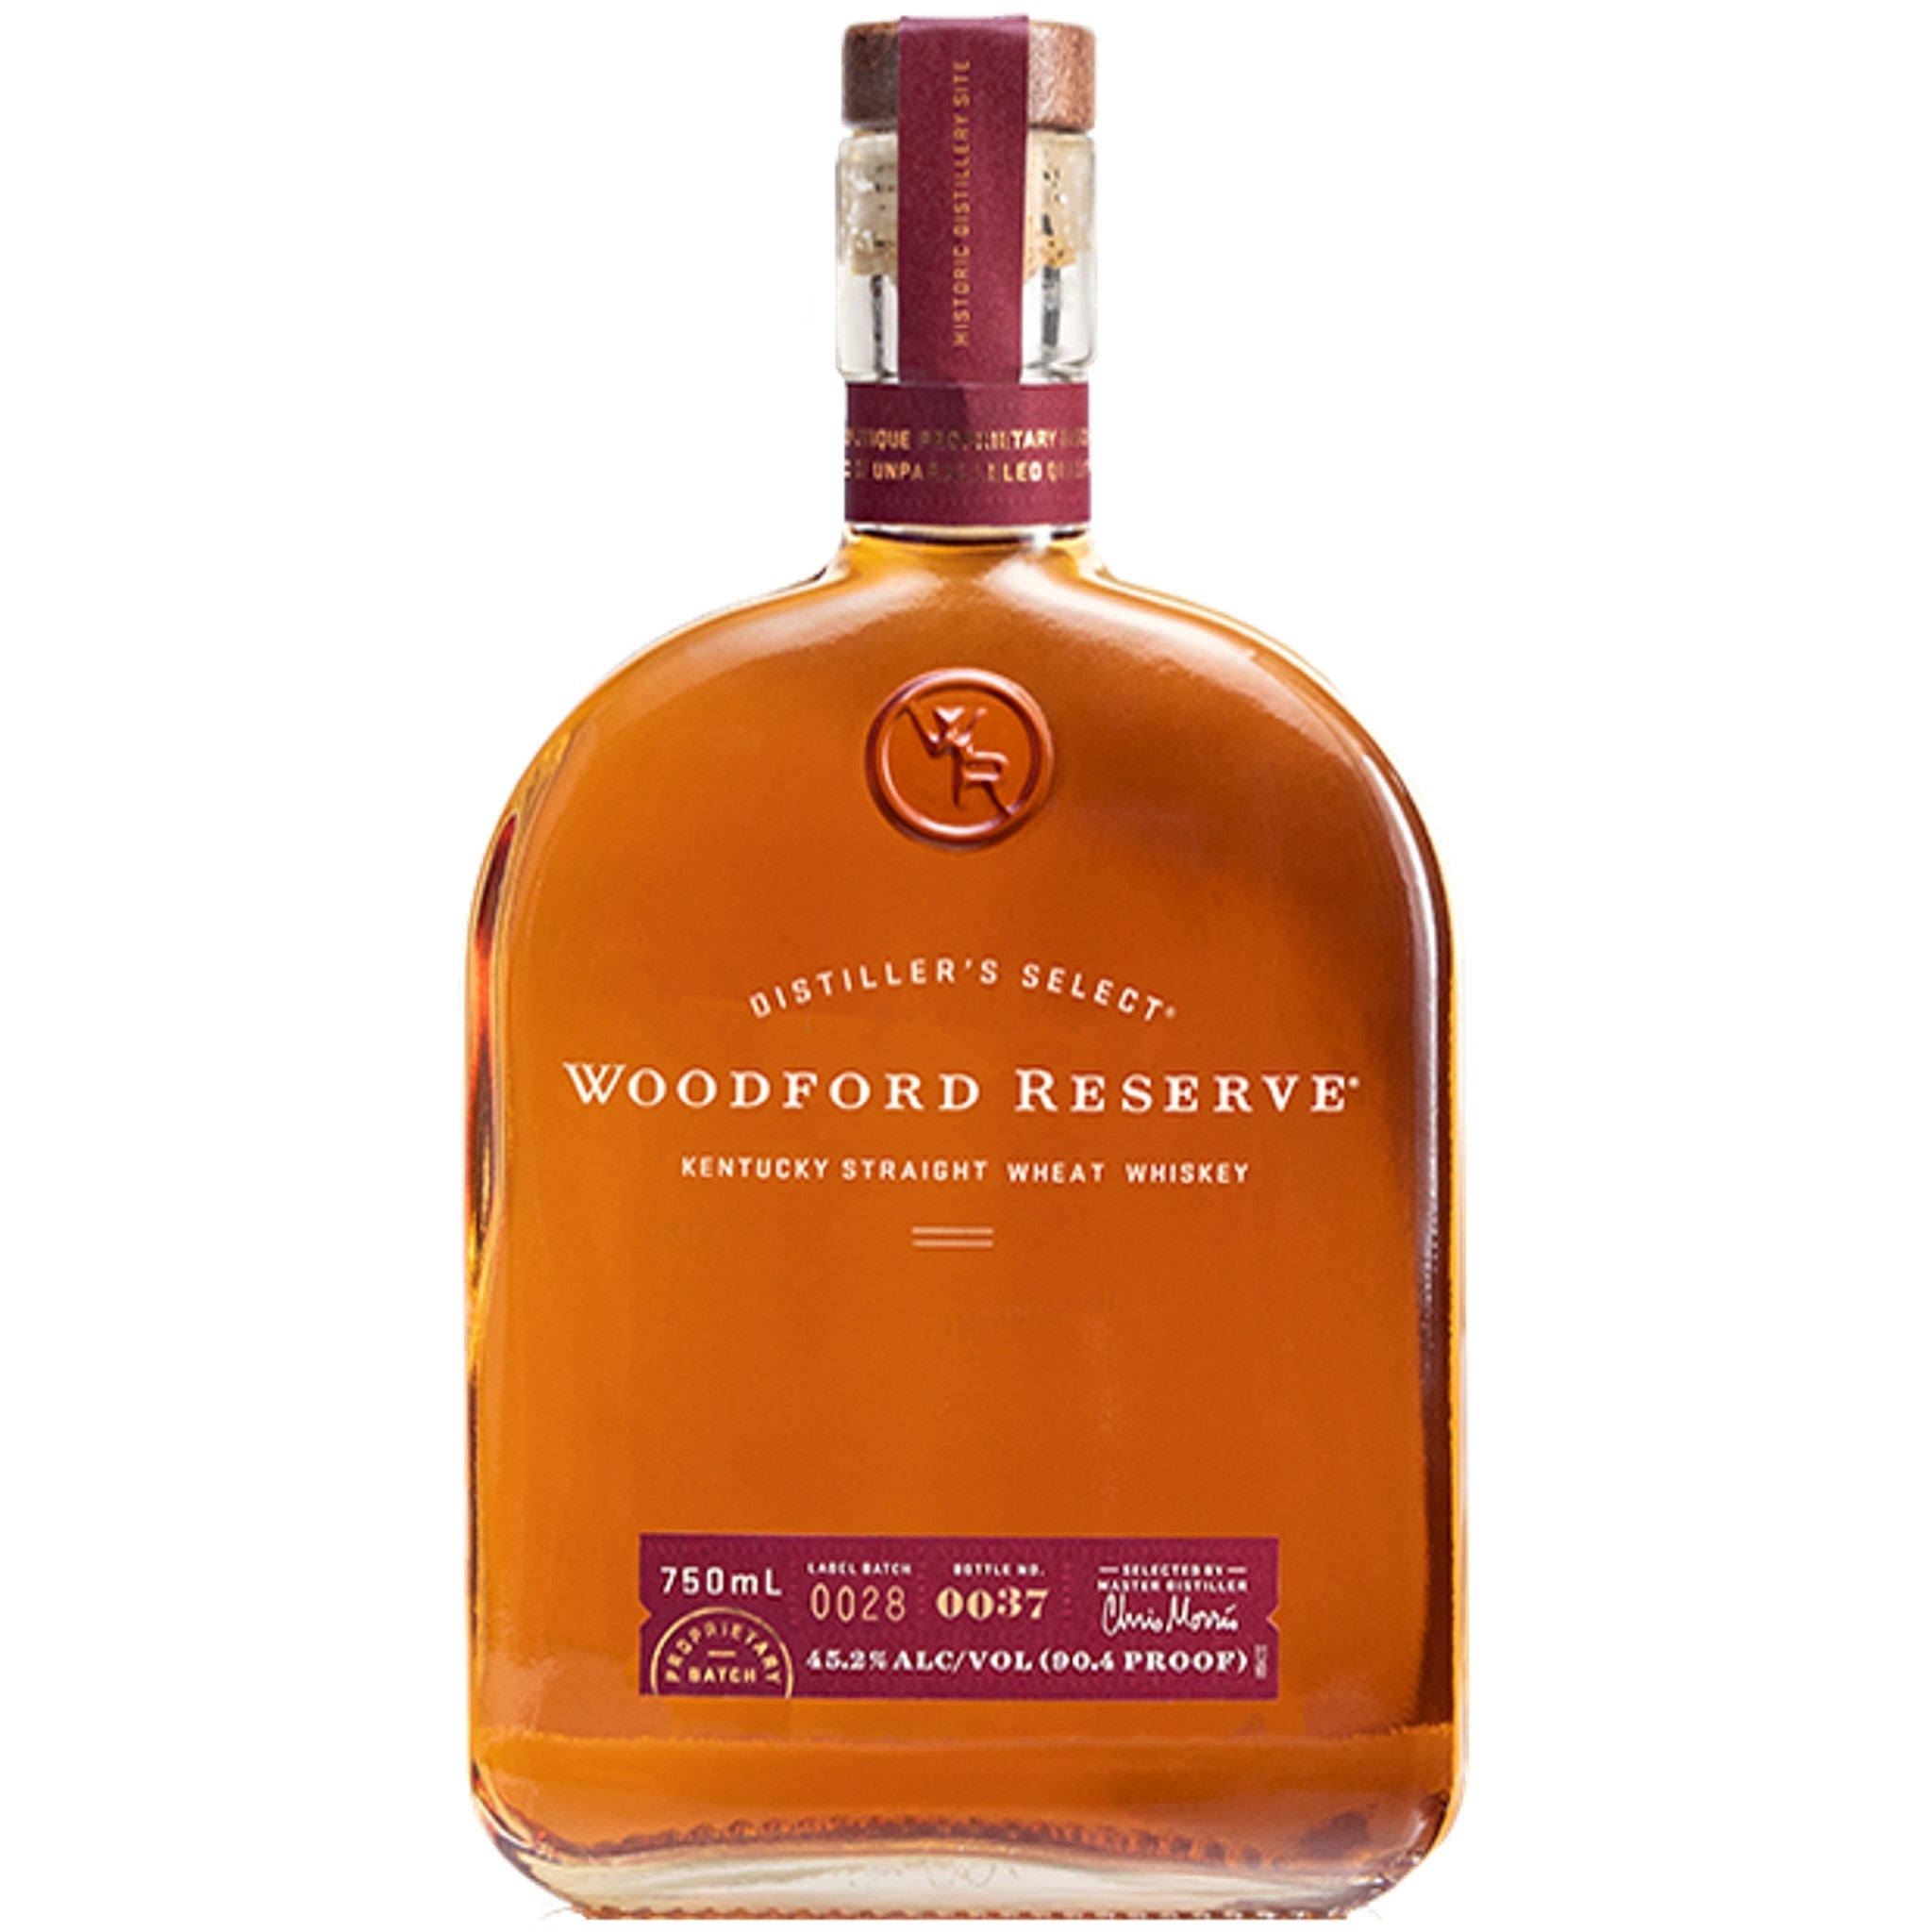 Woodford Reserve Distiller's Select - Kentucky Straight Wheat Whiskey (750ml)